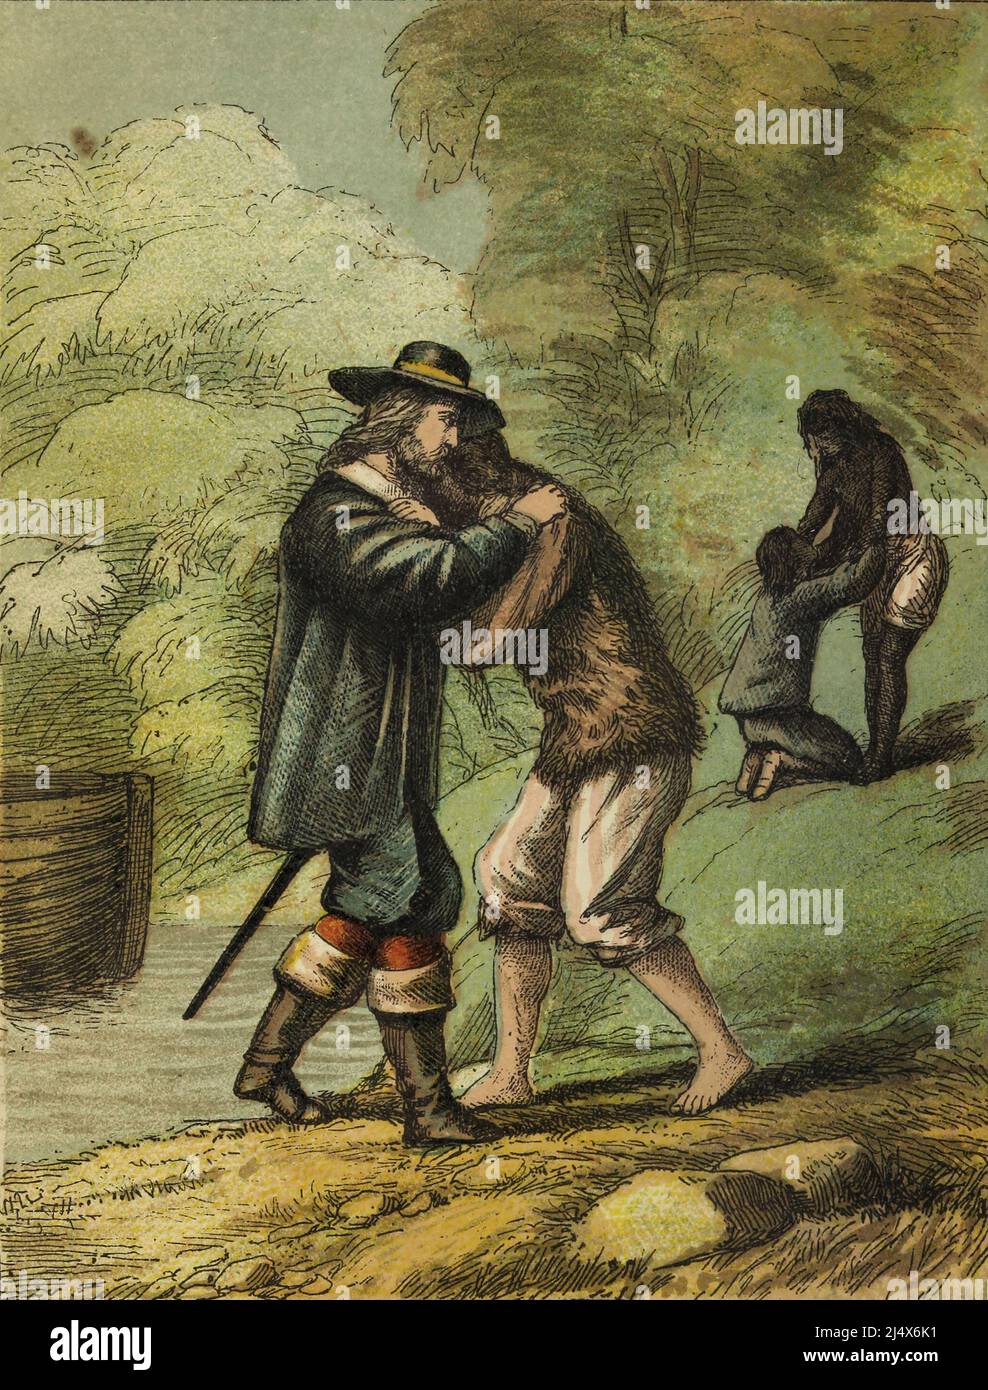 Crusoe's Second Landing on the Island from the book The life and adventures of Robinson Crusoe by Daniel Defoe, Illustrated in colour by EDWARD H. WEHNERT. Publisher Boston (Franklin and Hawley Streets) : D. Lothrop and Company 1884 Stock Photo